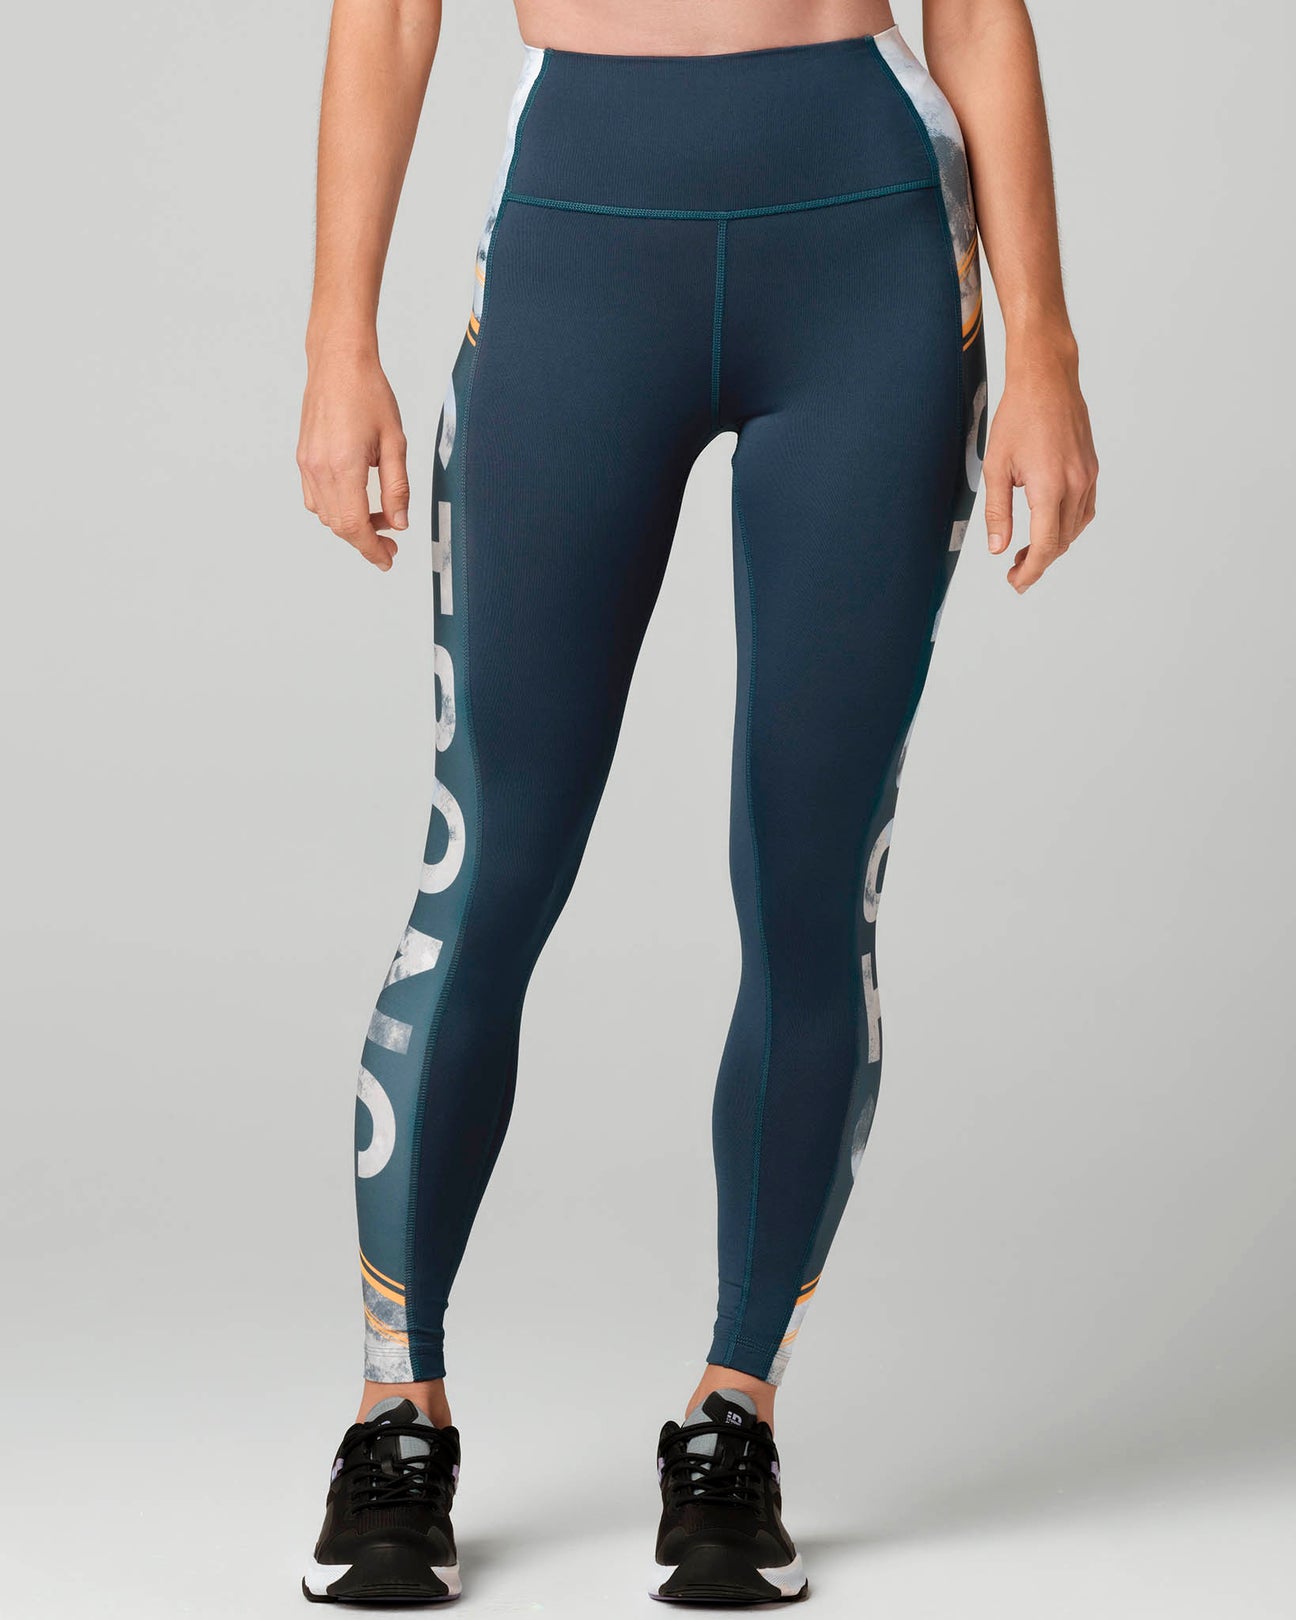 WOMEN'S LOLE STEP UP ANKLE LEGGINGS - Lefebvre's Source For Adventure